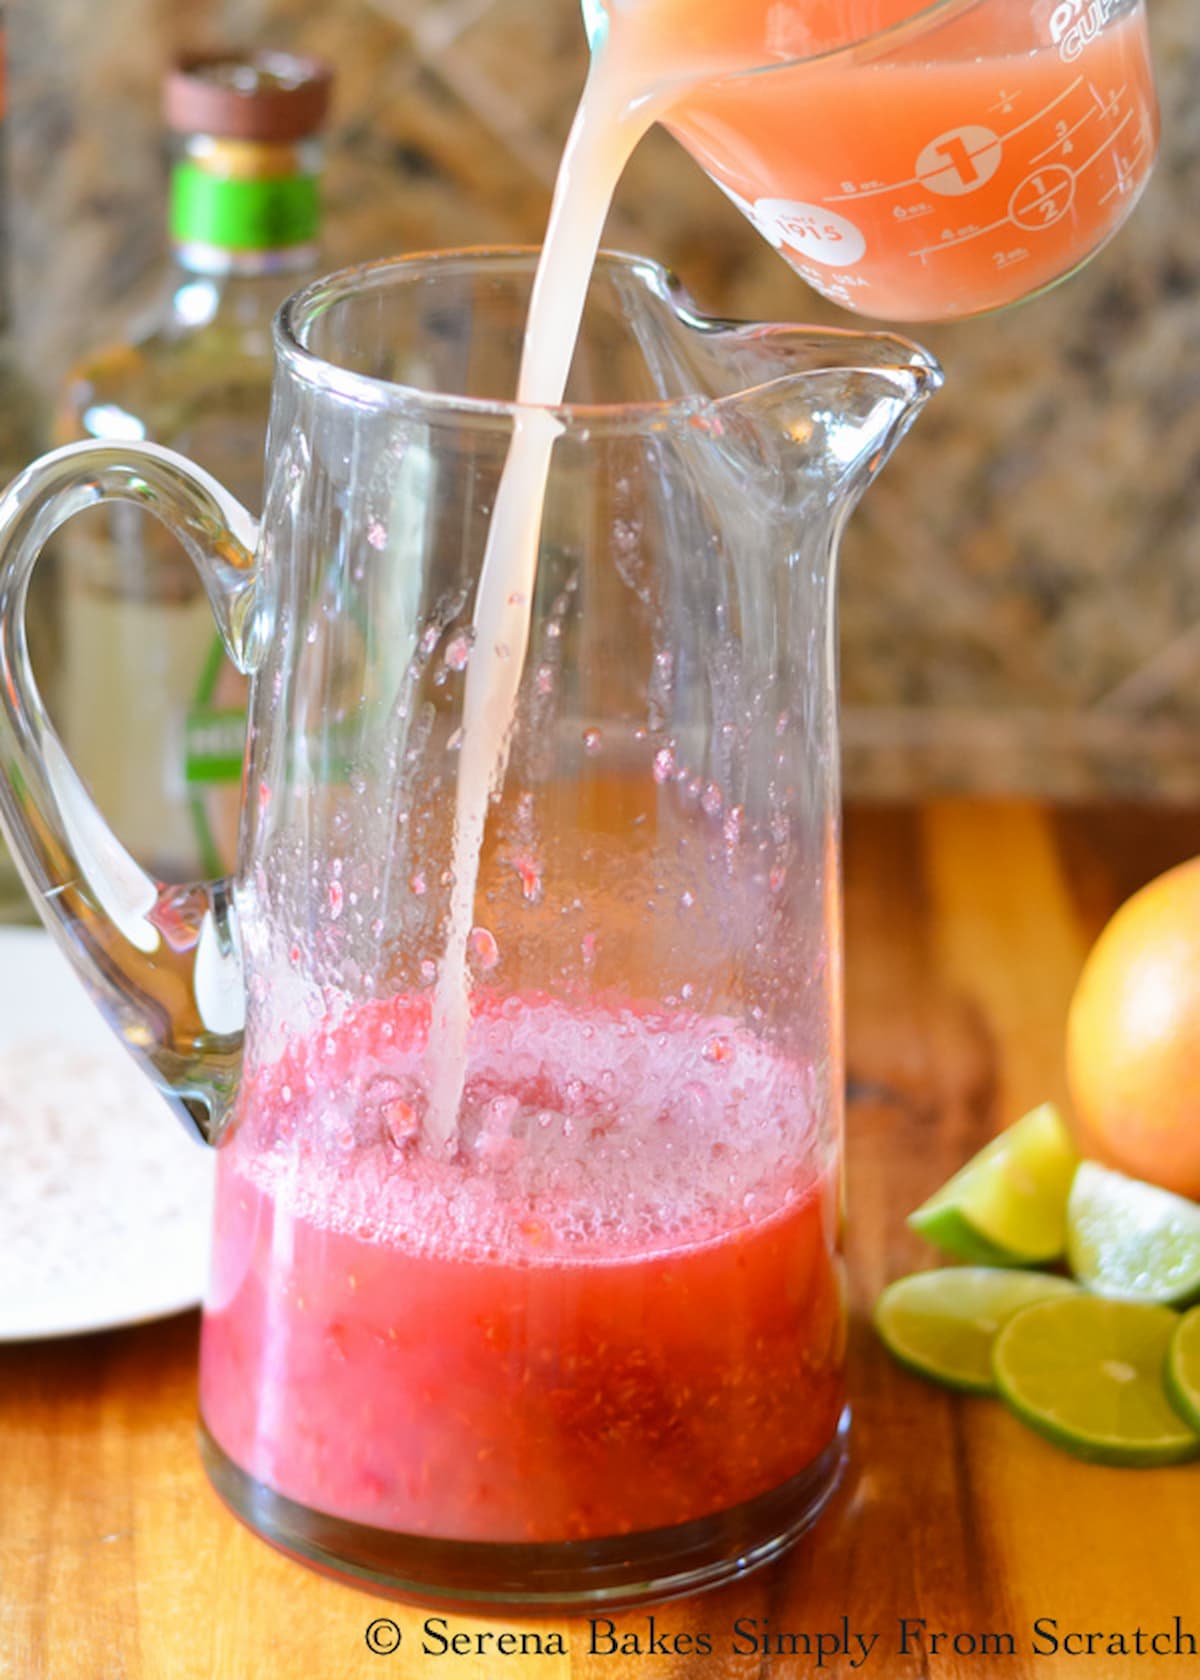 Pink Grapefruit Juice being poured into Raspberry Margarita mixture in a glass pitcher.